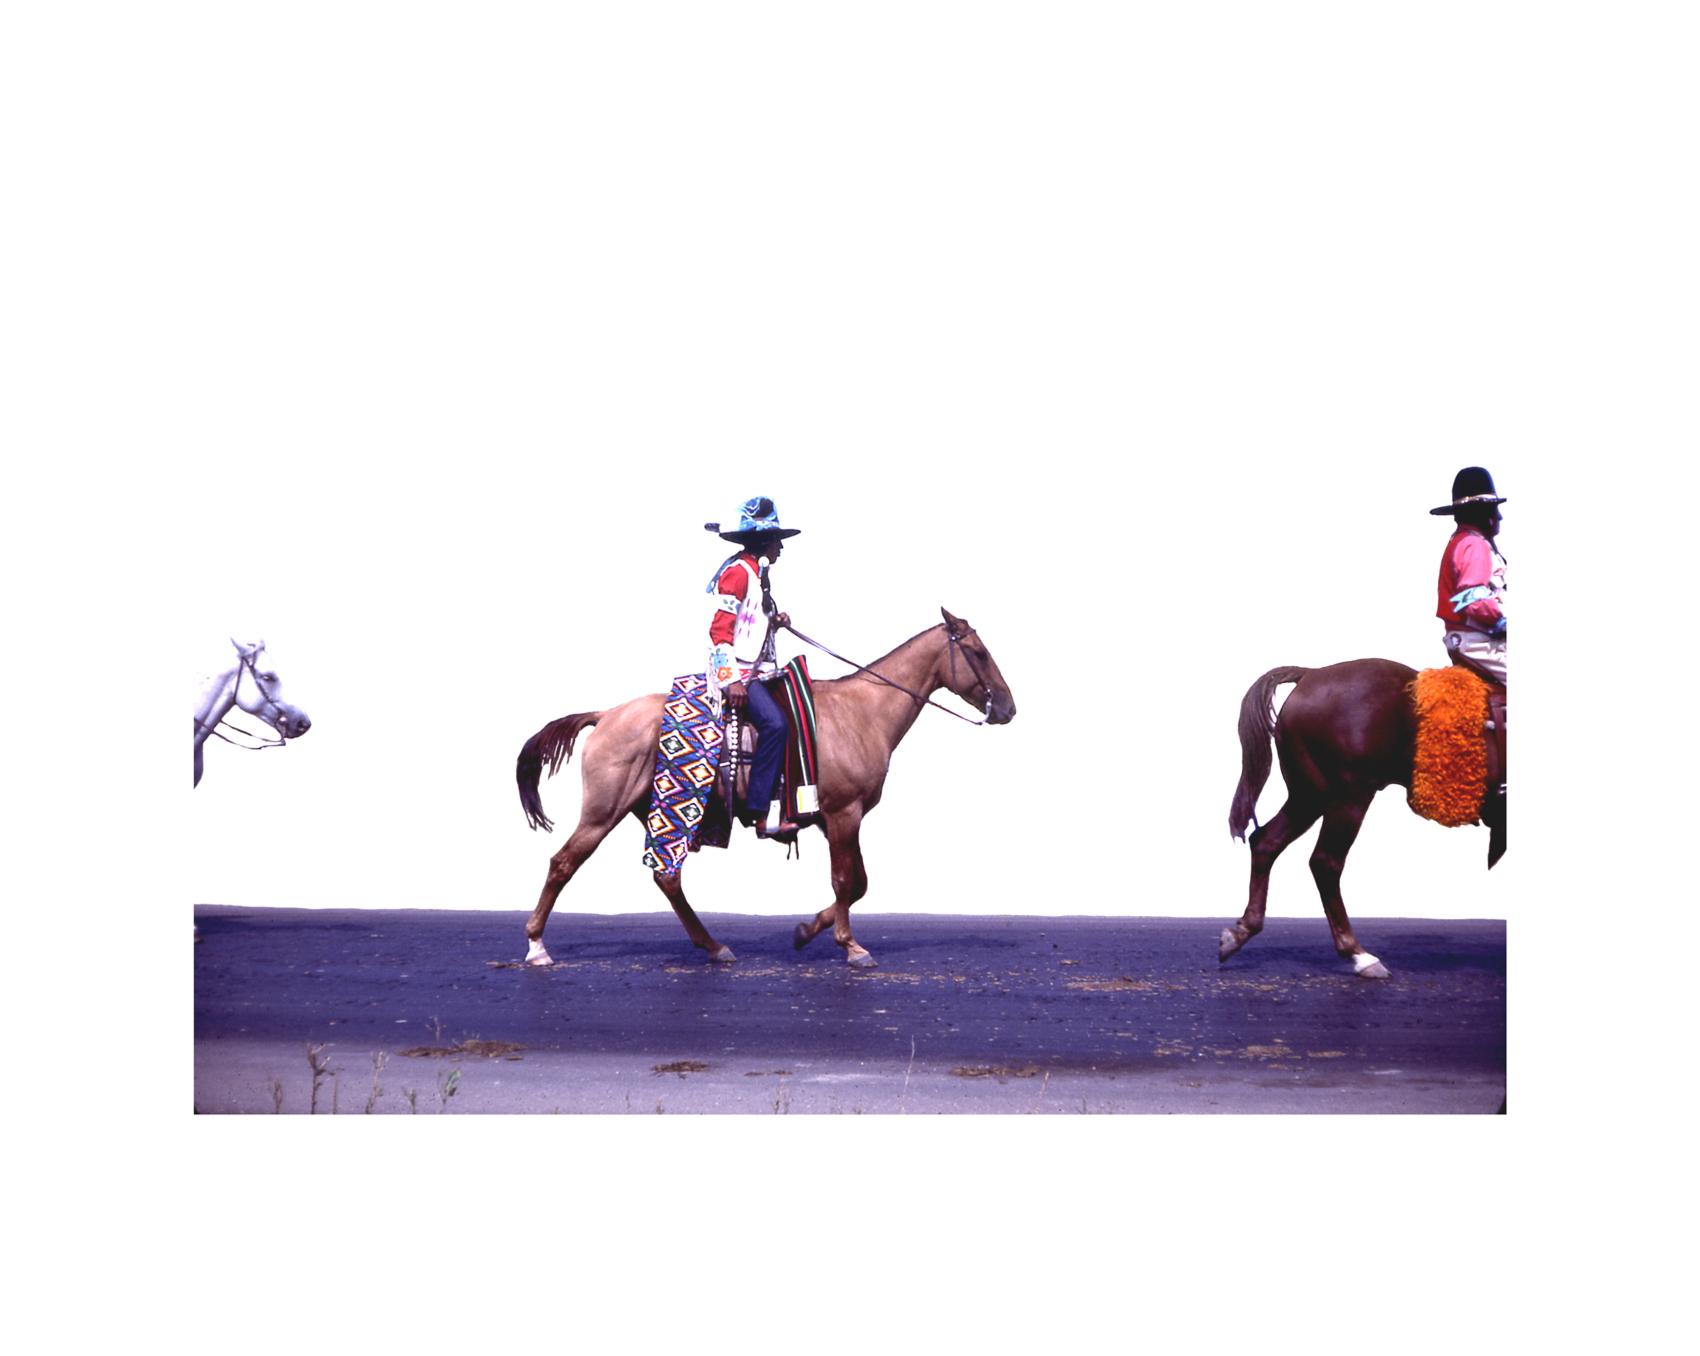  Wendy Red Star,  Rez Hats , 2014, slide of Crow Fair parade at Crow Agency in the 1970s, archival pigment print. 